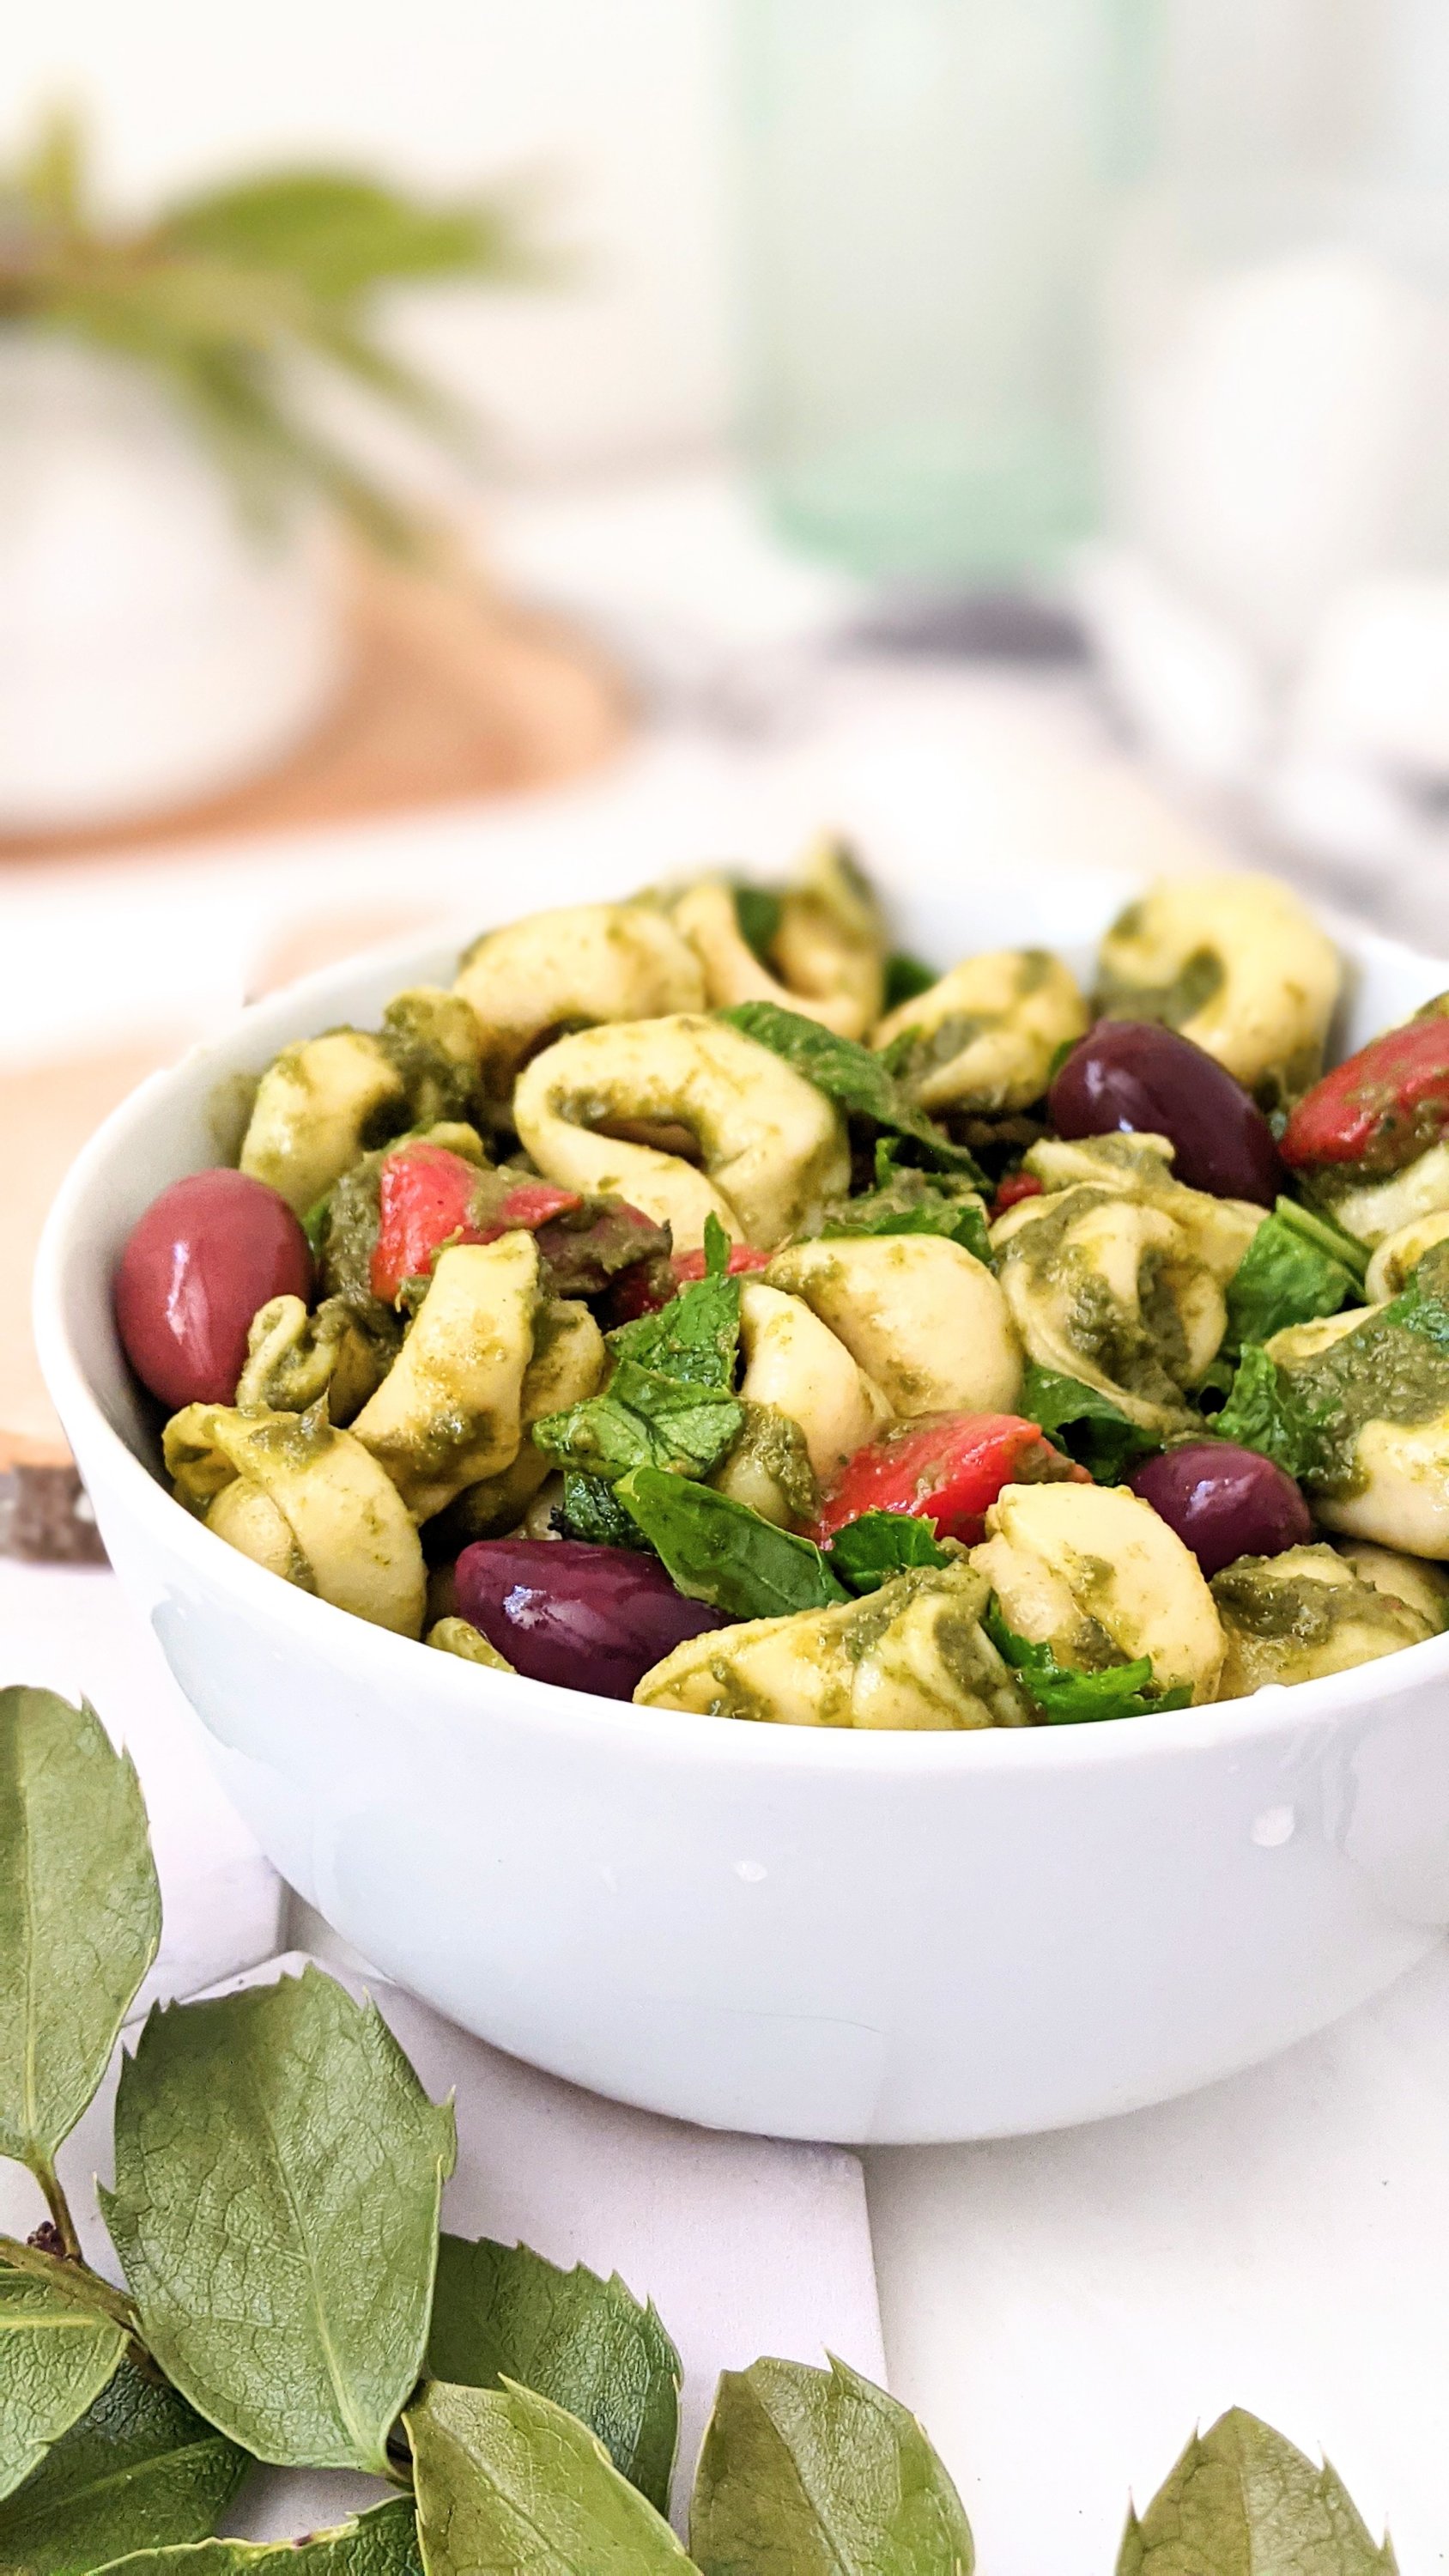 meatless tortellini salad with pesto dressing healthy vegetarian summer side salads entertaining recipes in half hour pasta salad recipes healthy basil dressing